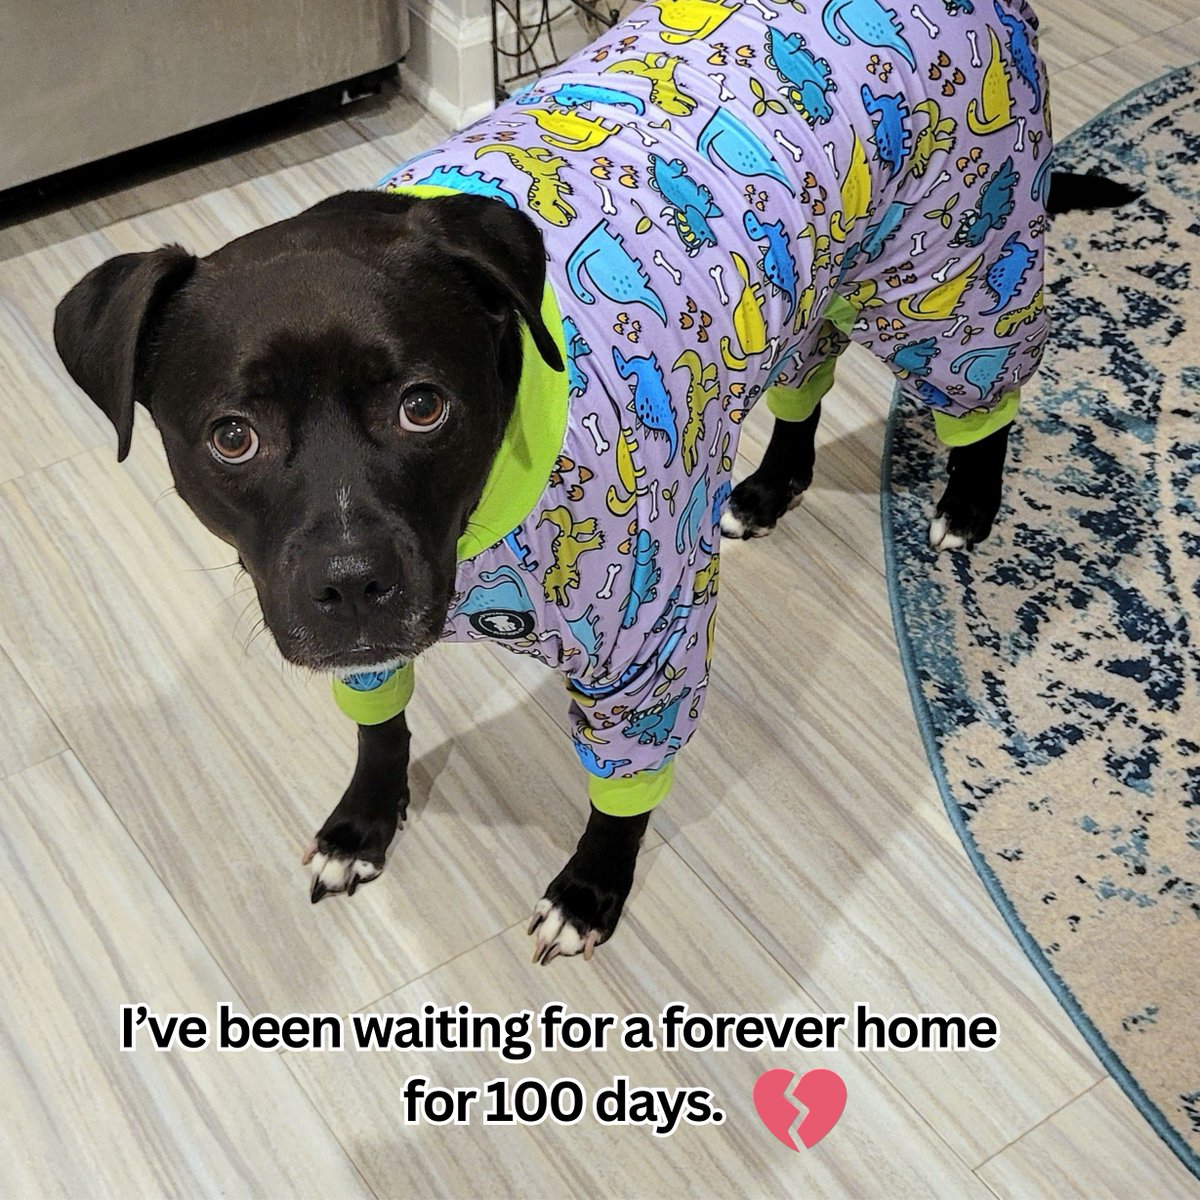 This is Koko. She has been waiting for a forever home for 100 days. It is a bittersweet anniversary because we get to spend so much time with her, but no dog deserves to wait so long for a forever family. Learn more about Koko: bit.ly/4d2Ggp6